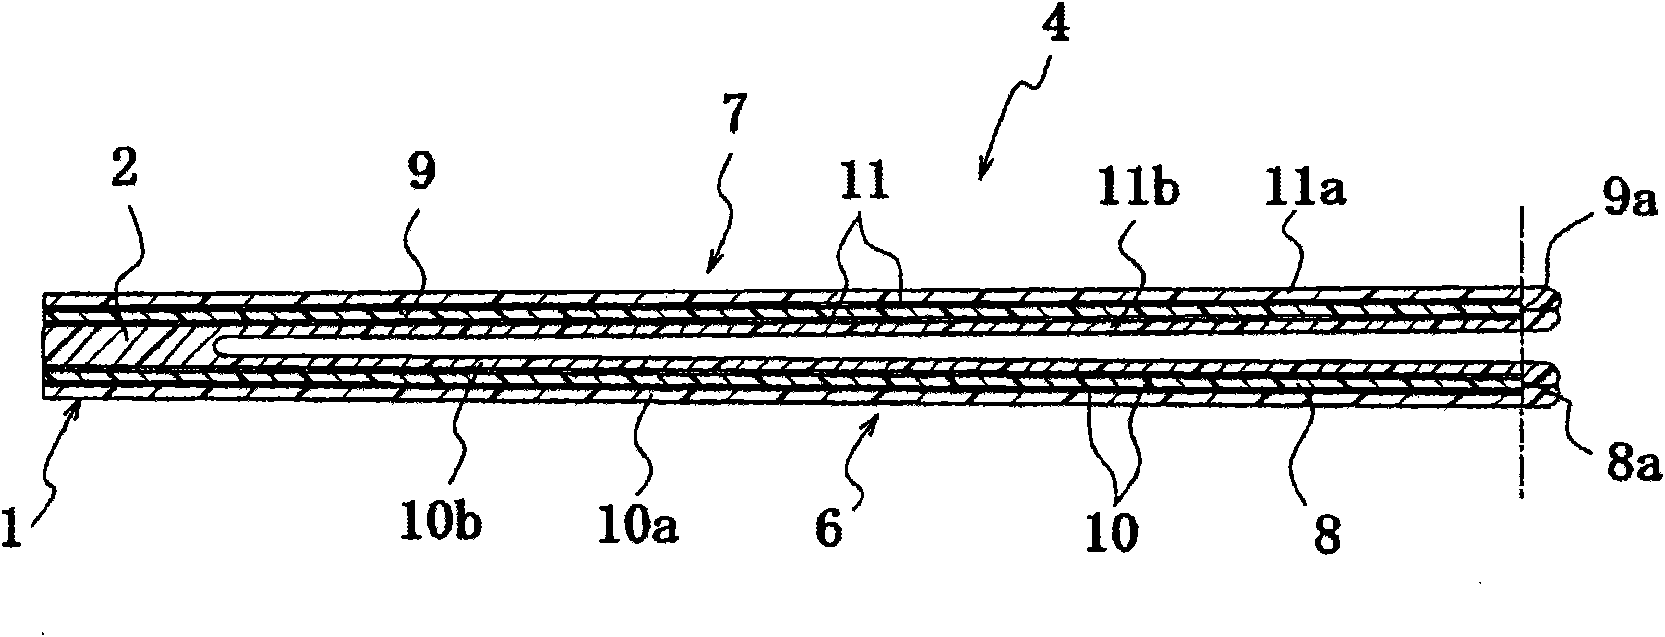 Edge face structure of laminated film, method of processing edge face, liquid ejection nozzle with processed edge face, and process for producing the same